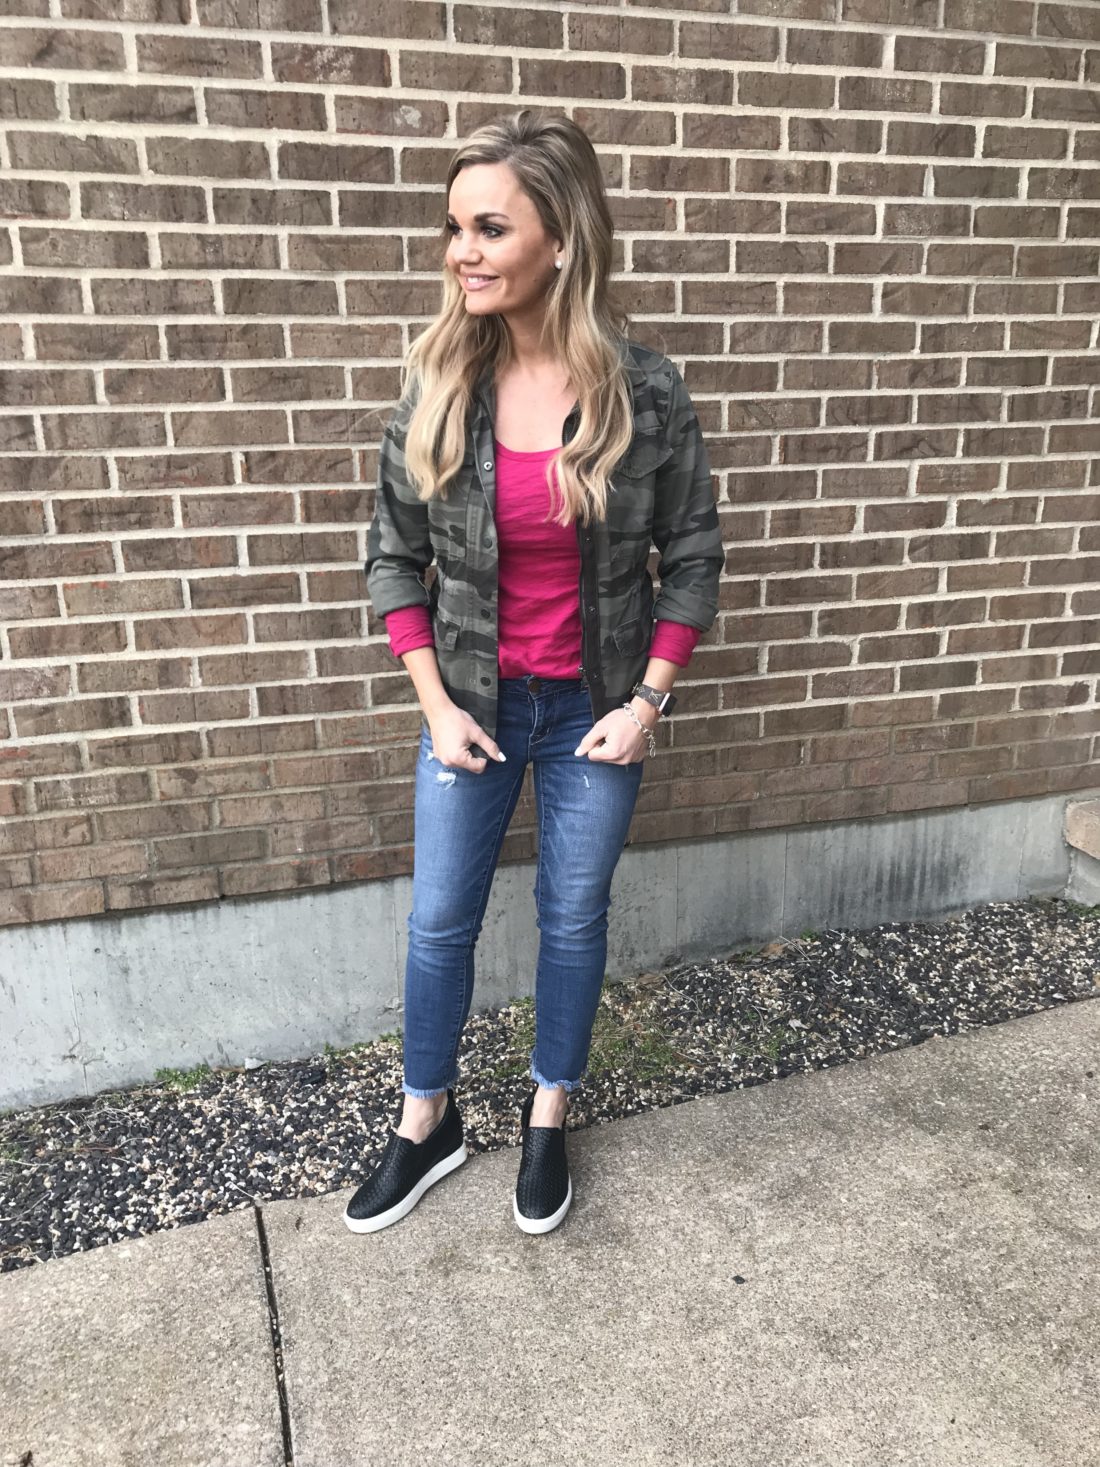 Casual outfit for spring. Camo jacket and Pink Tee.